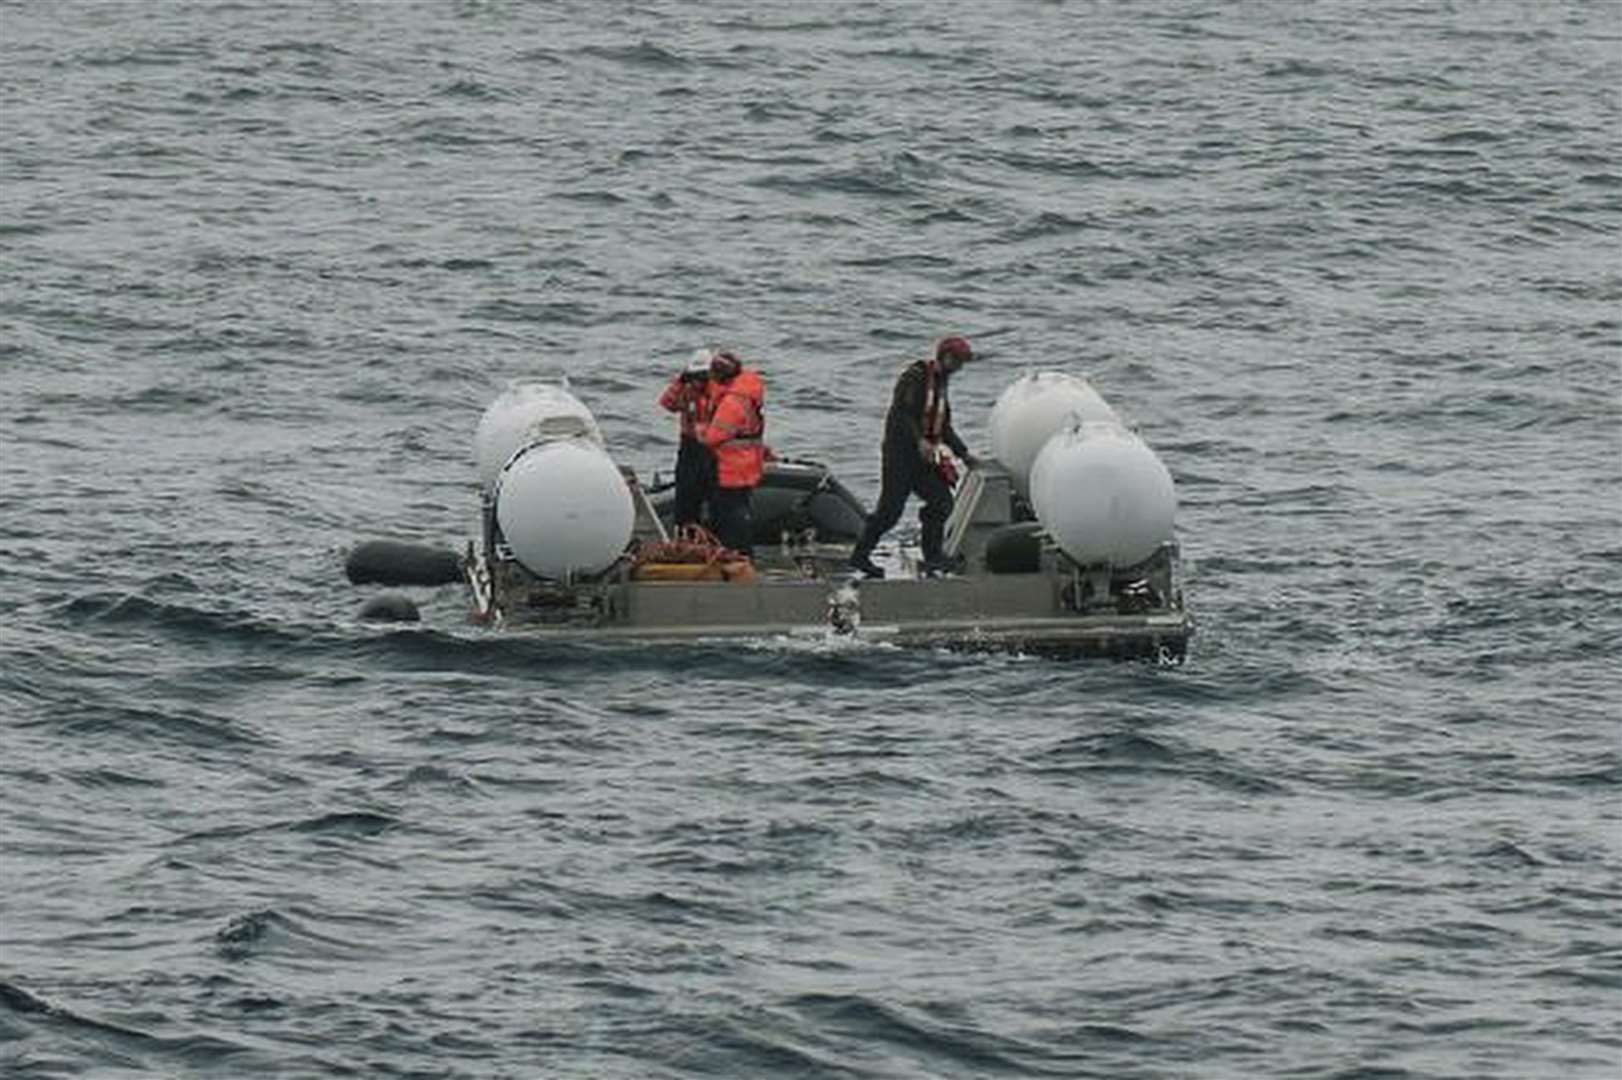 The submersible Titan is prepared for a dive into a remote area of the Atlantic Ocean (Action Aviation/AP)